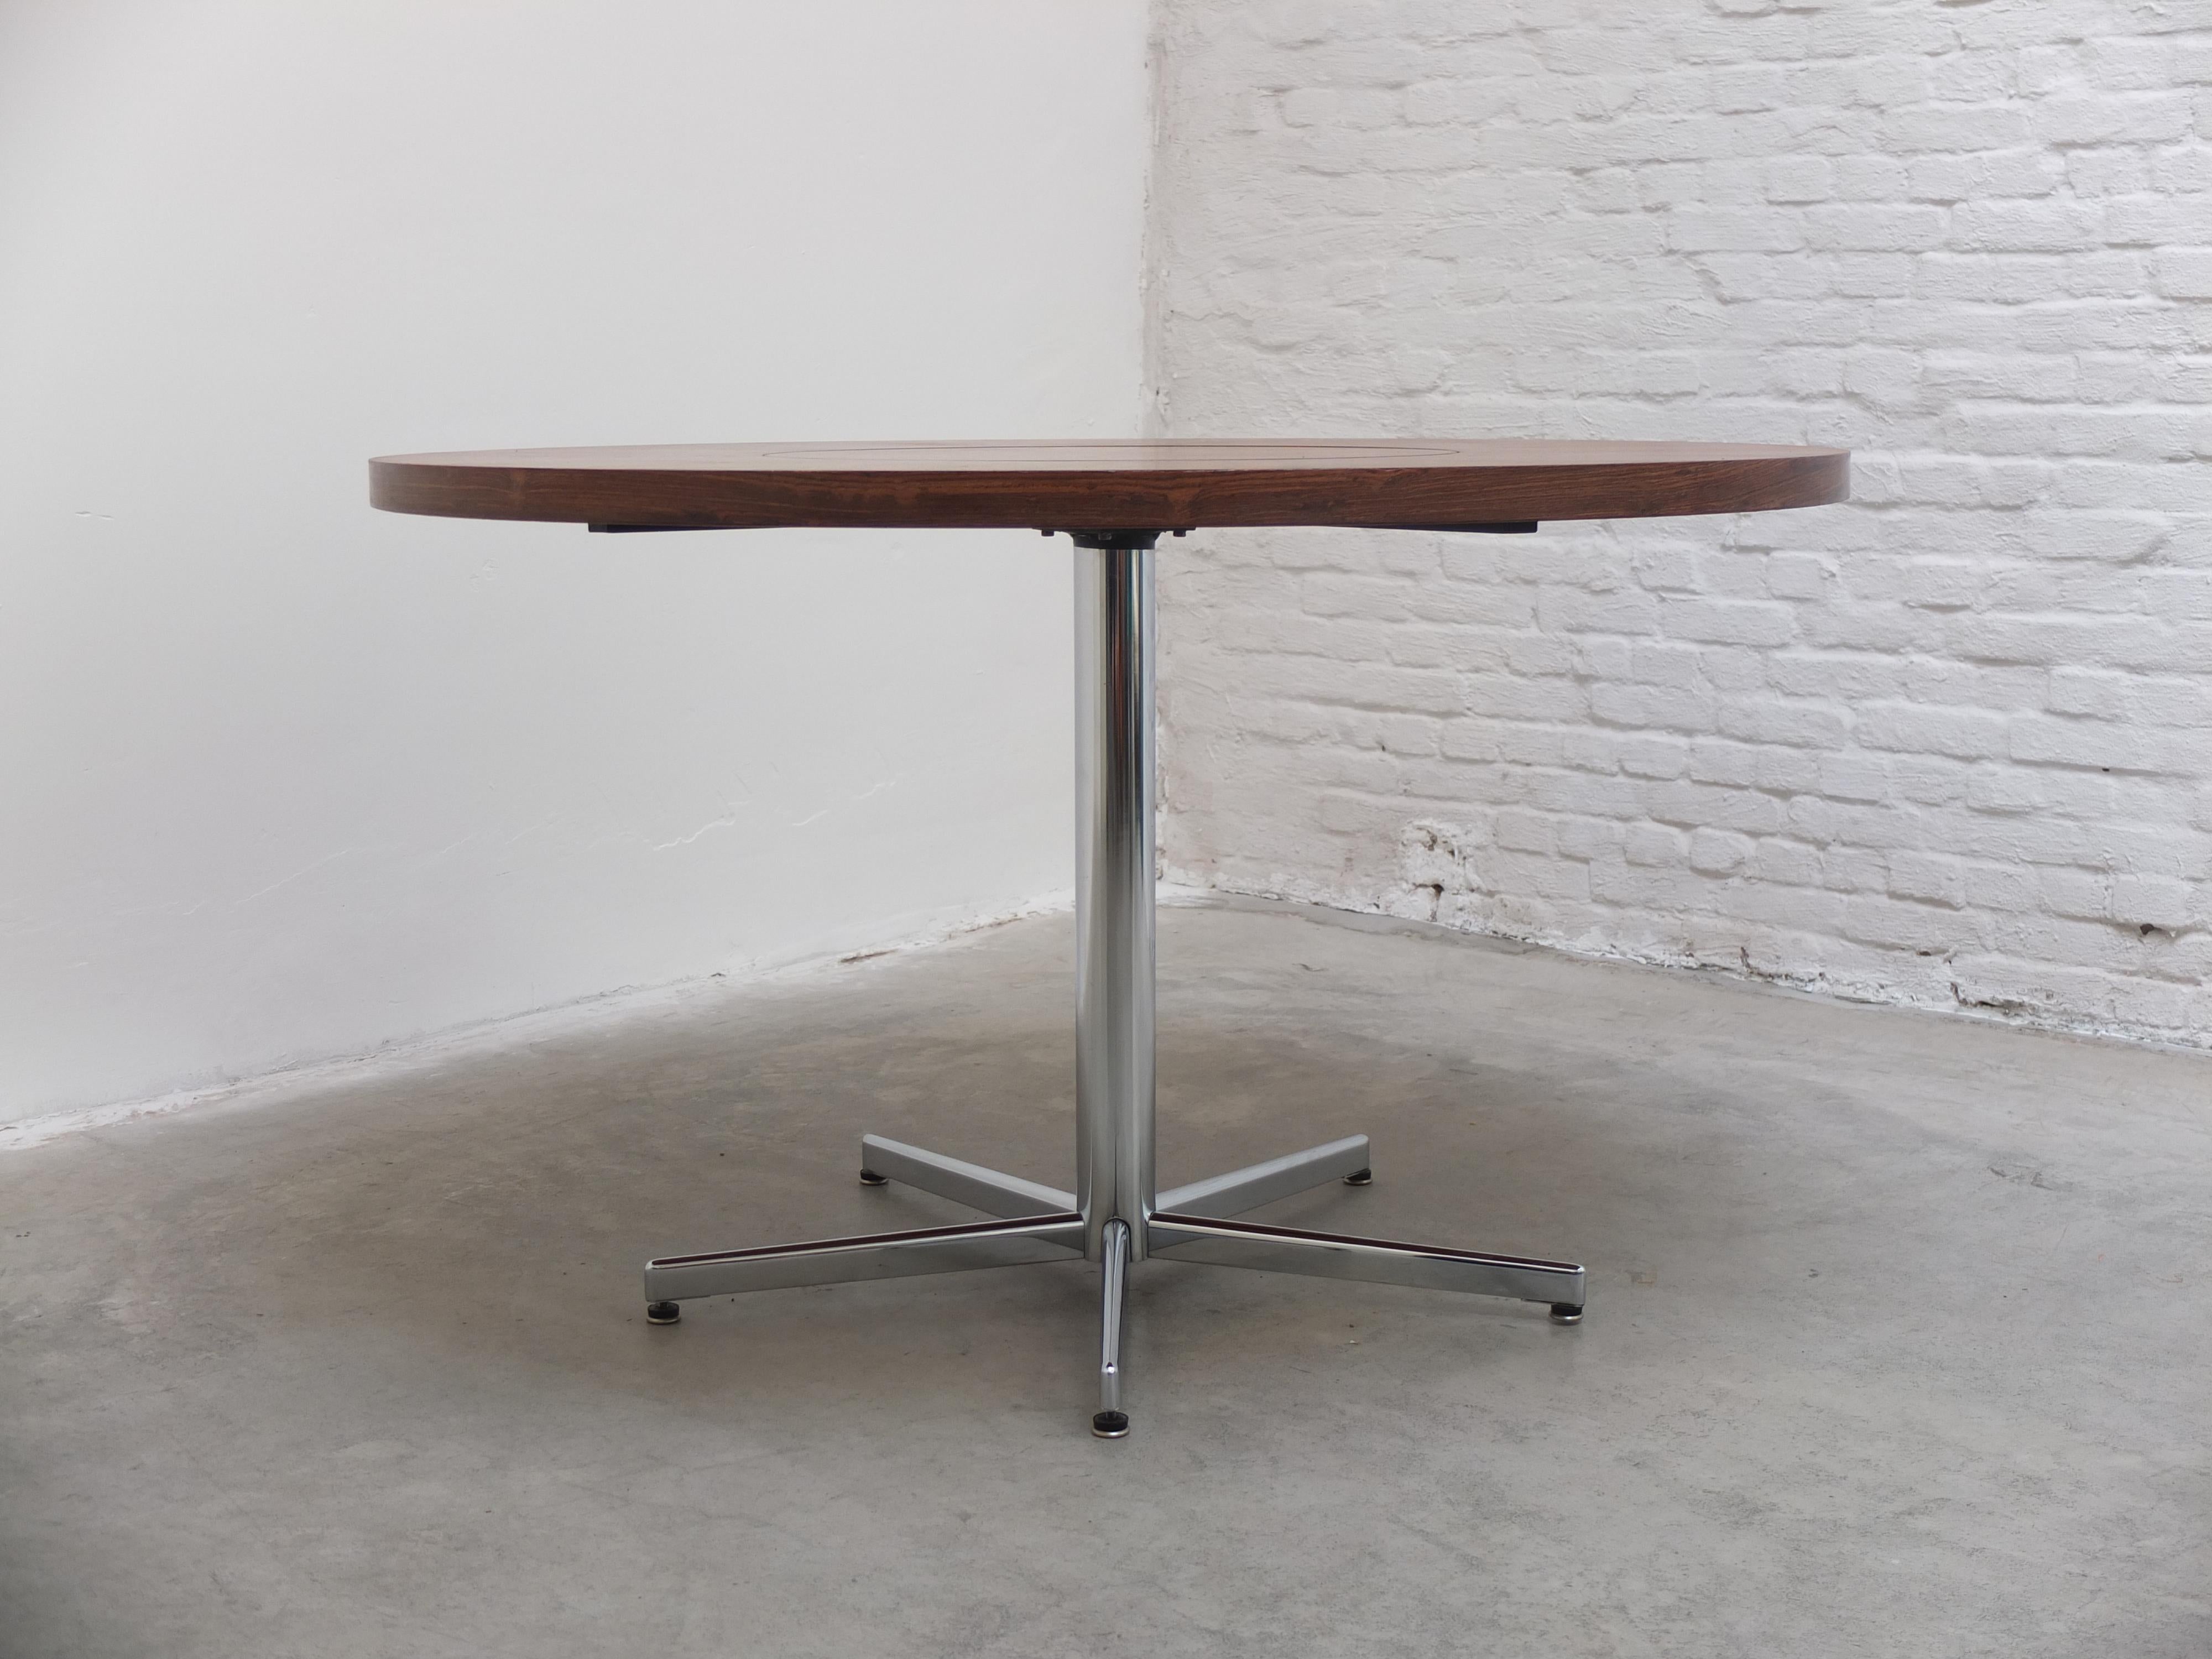 20th Century Round Rosewood Table with Rotating Center by EMÜ Germany, 1960s